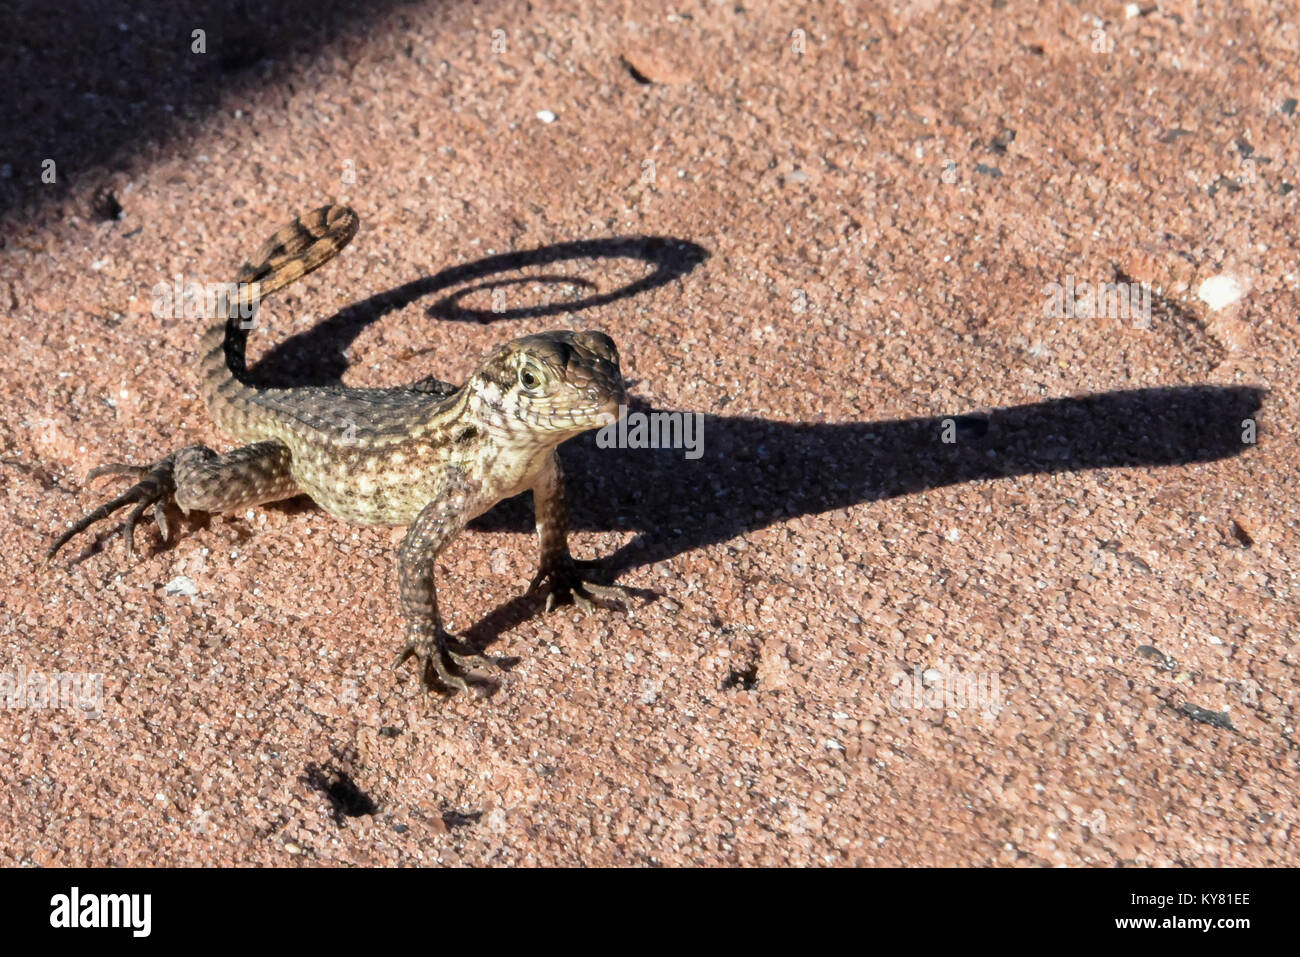 A lizard basks in the warm sun on the Caribbean / Bahamian Islands / Bahamas with a curled / curling tail - shadow on red stone - cold-blooded reptile Stock Photo